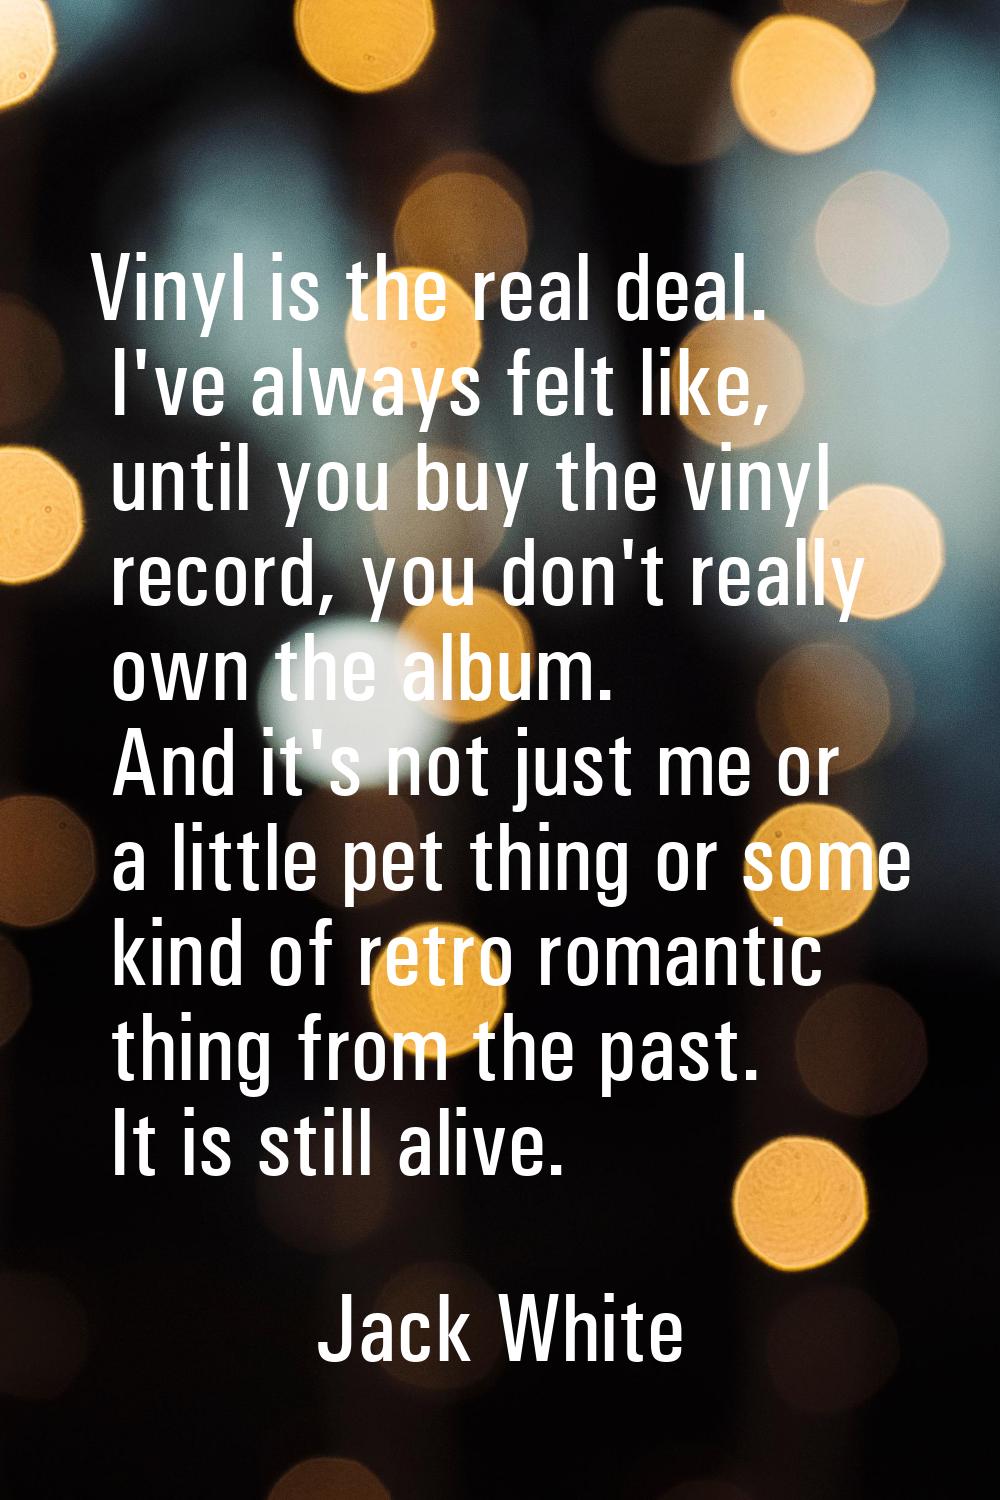 Vinyl is the real deal. I've always felt like, until you buy the vinyl record, you don't really own